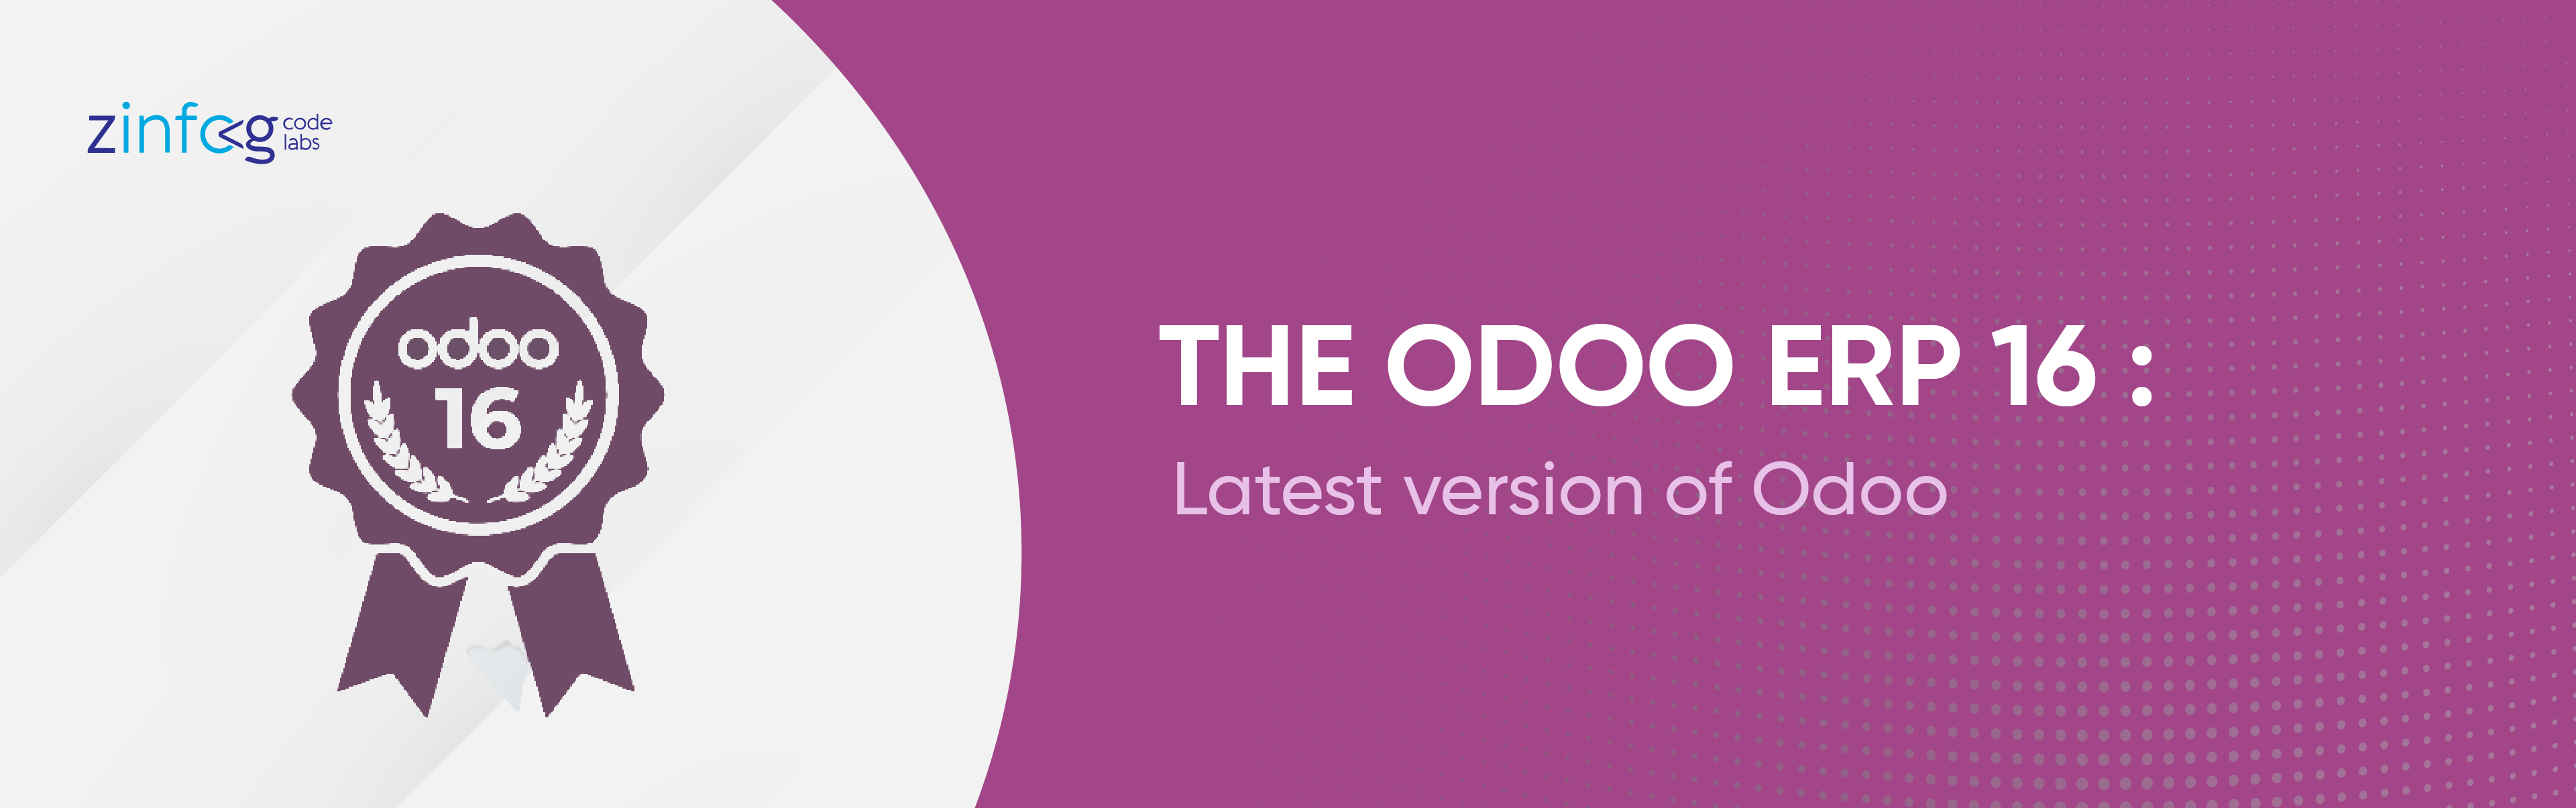 the-odoo-erp-16-latest-version-of-odoo.html